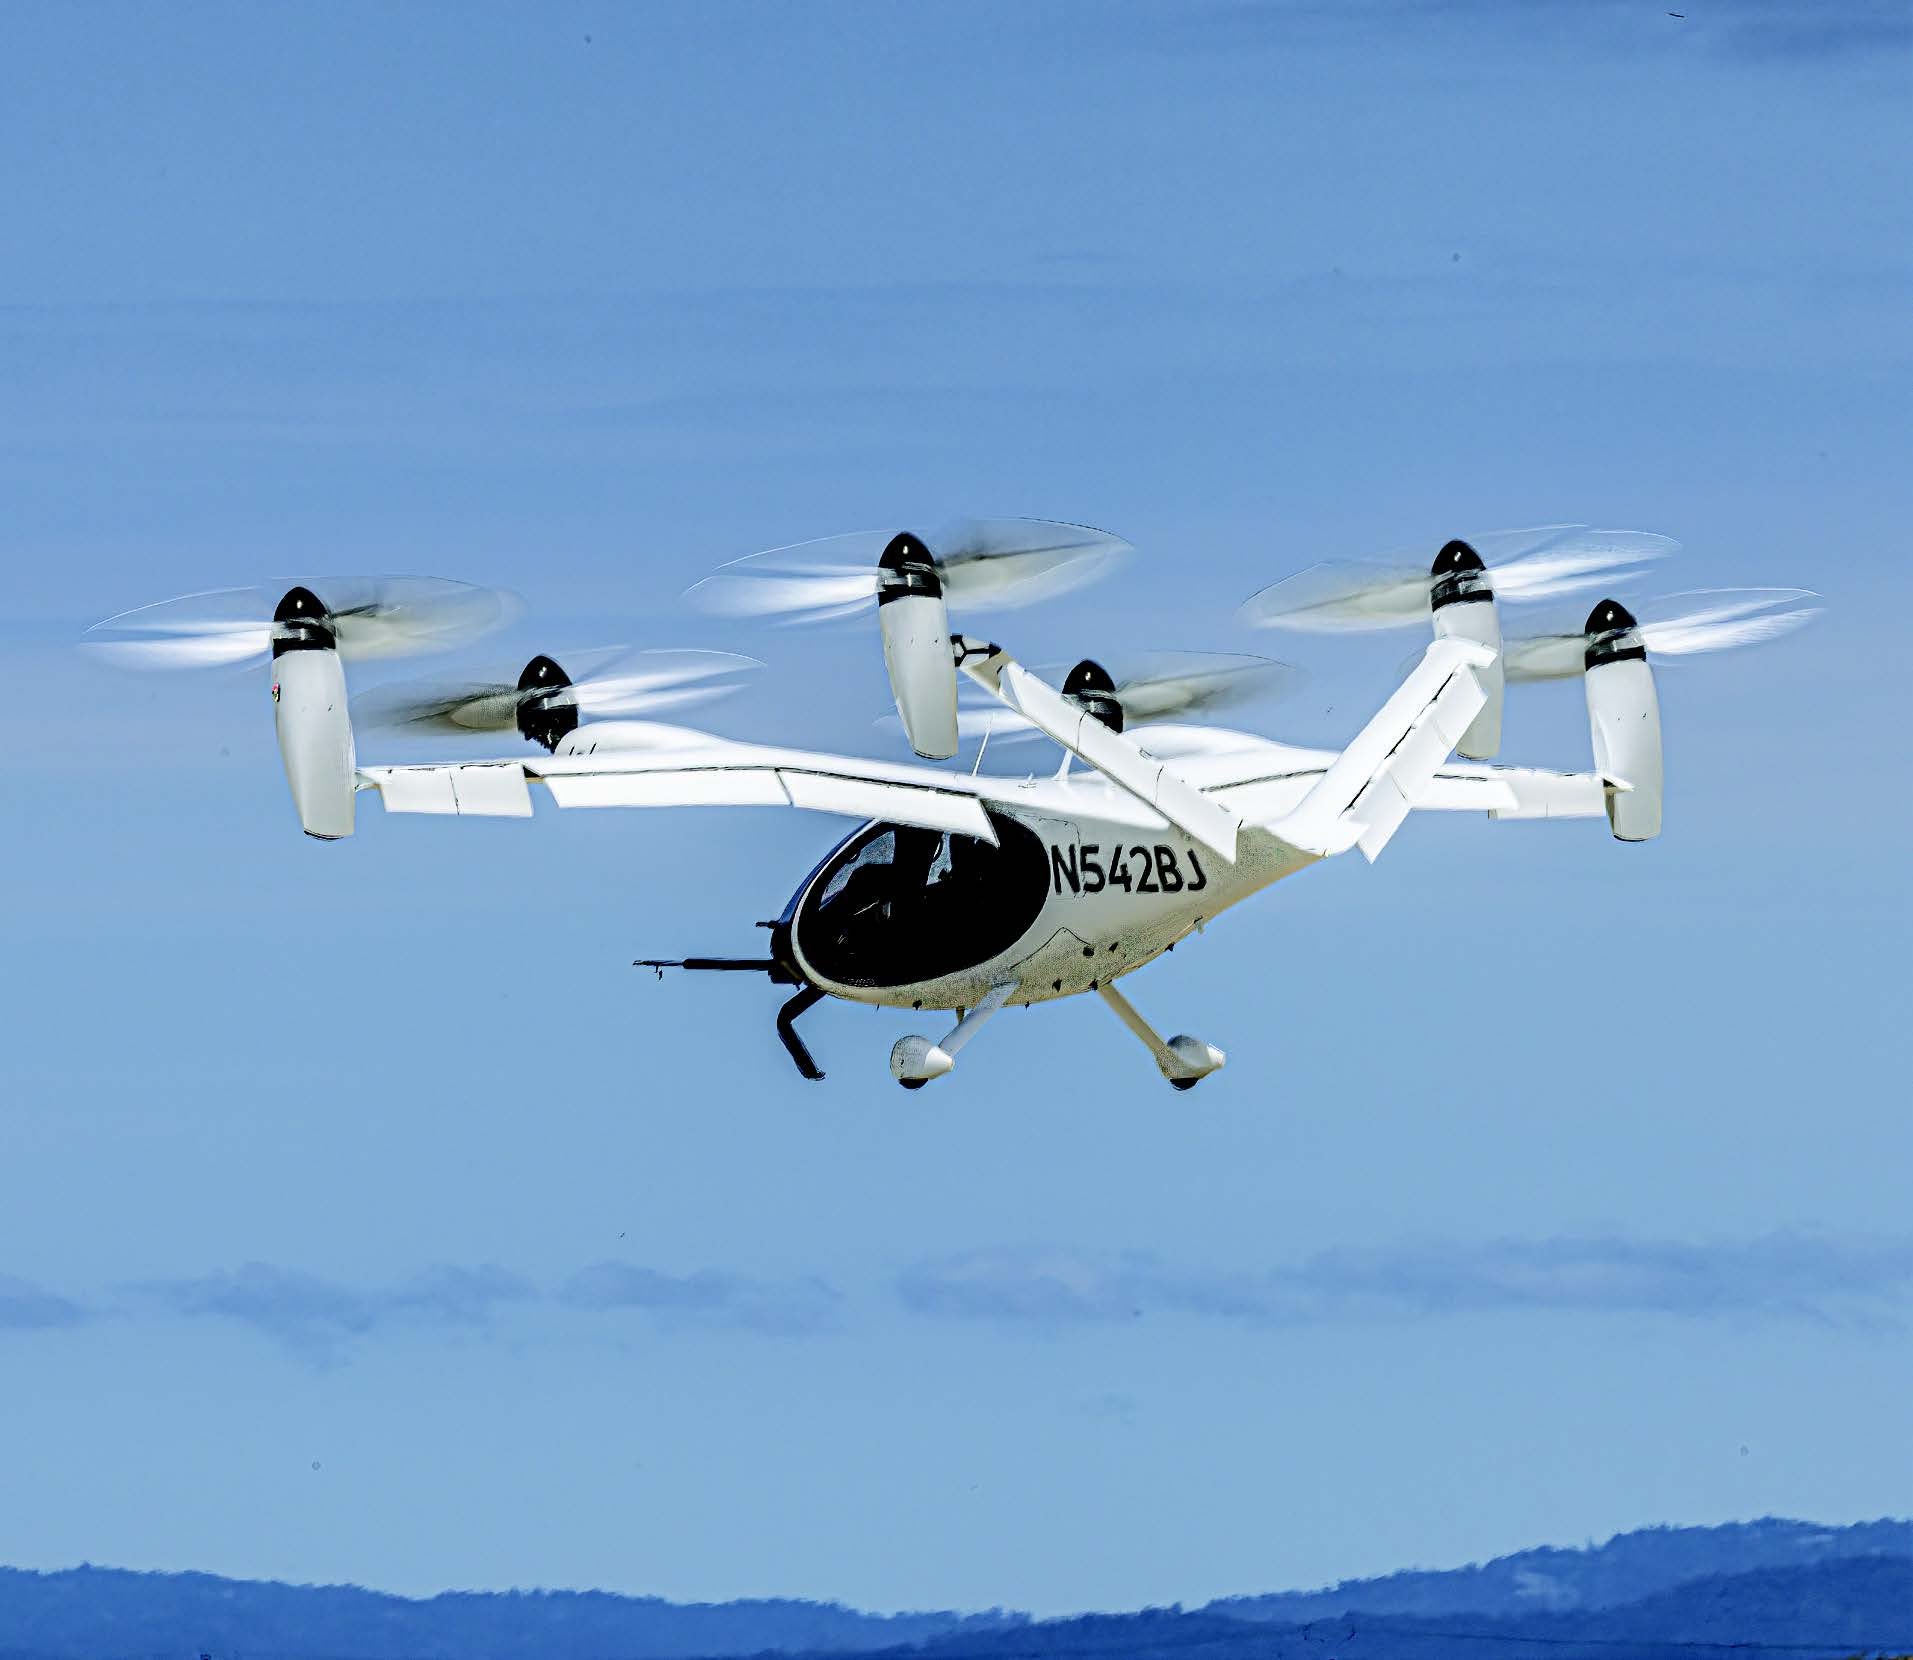 A First Look at Joby’s eVTOL Future